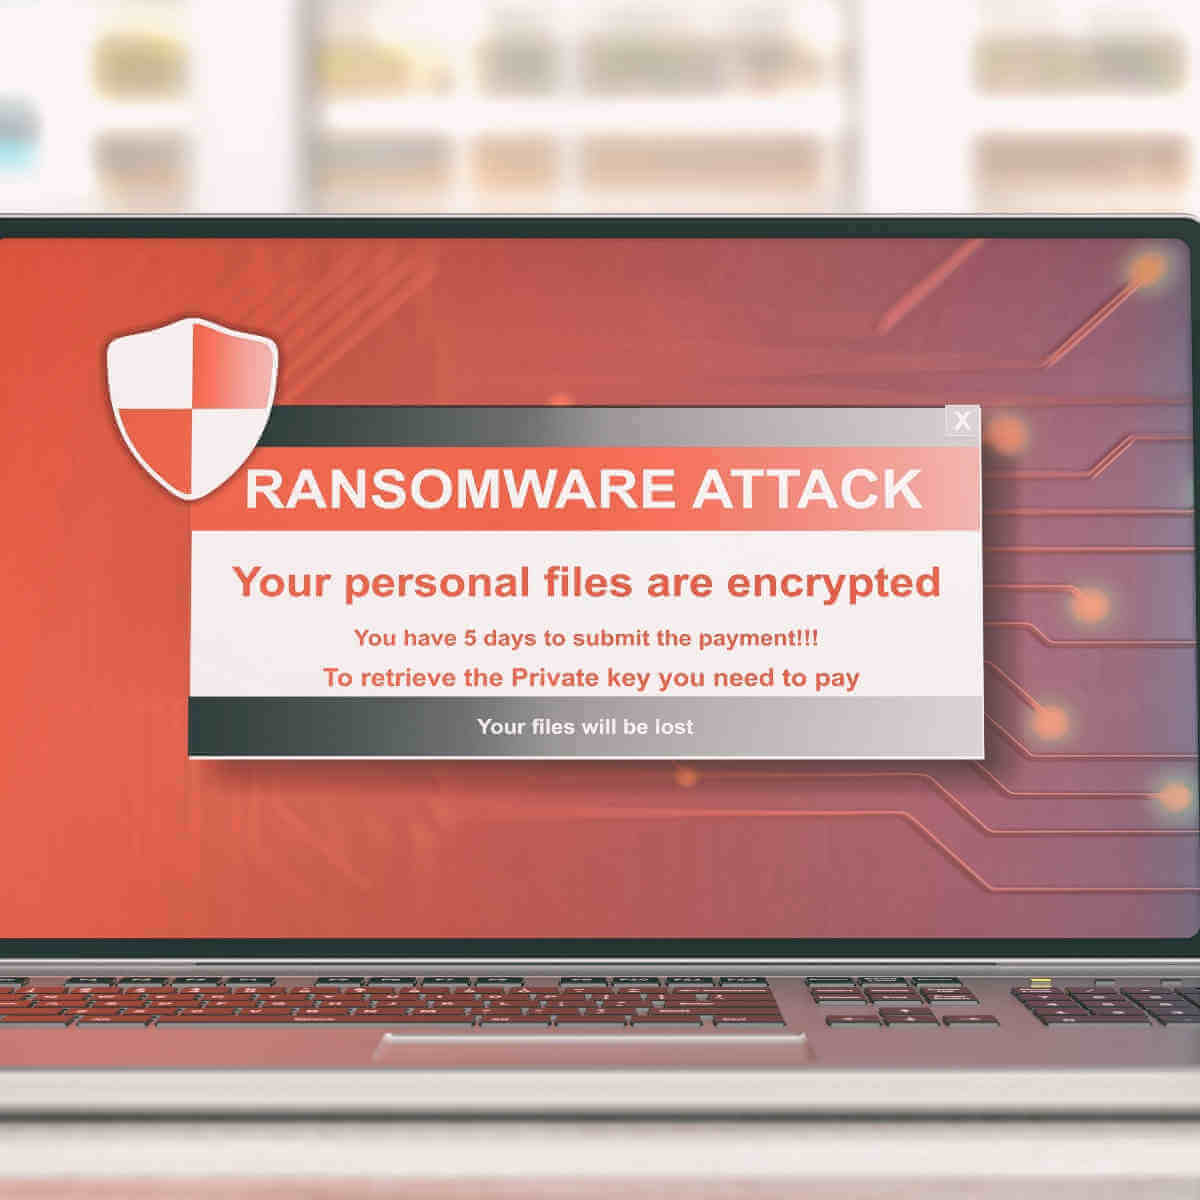 Windows 10 PCs target for Ransomware as a Service attacks